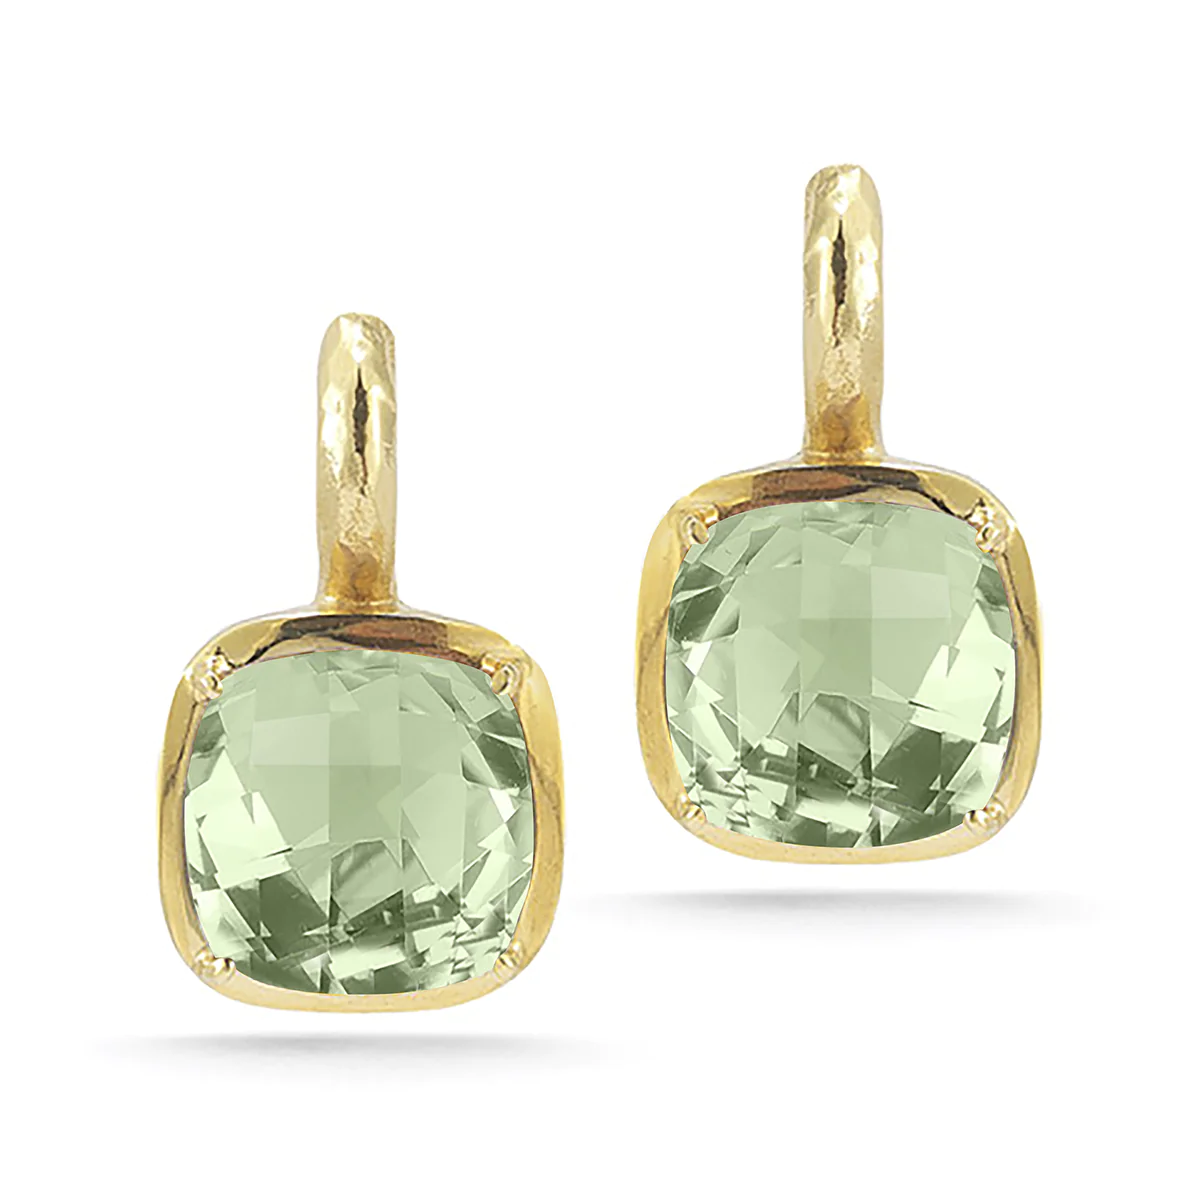 14kt Yellow Gold Matte And Hammer-Finished Earrings Set With A Square-Shaped Green Amethyst Semi-Precious Color Stone